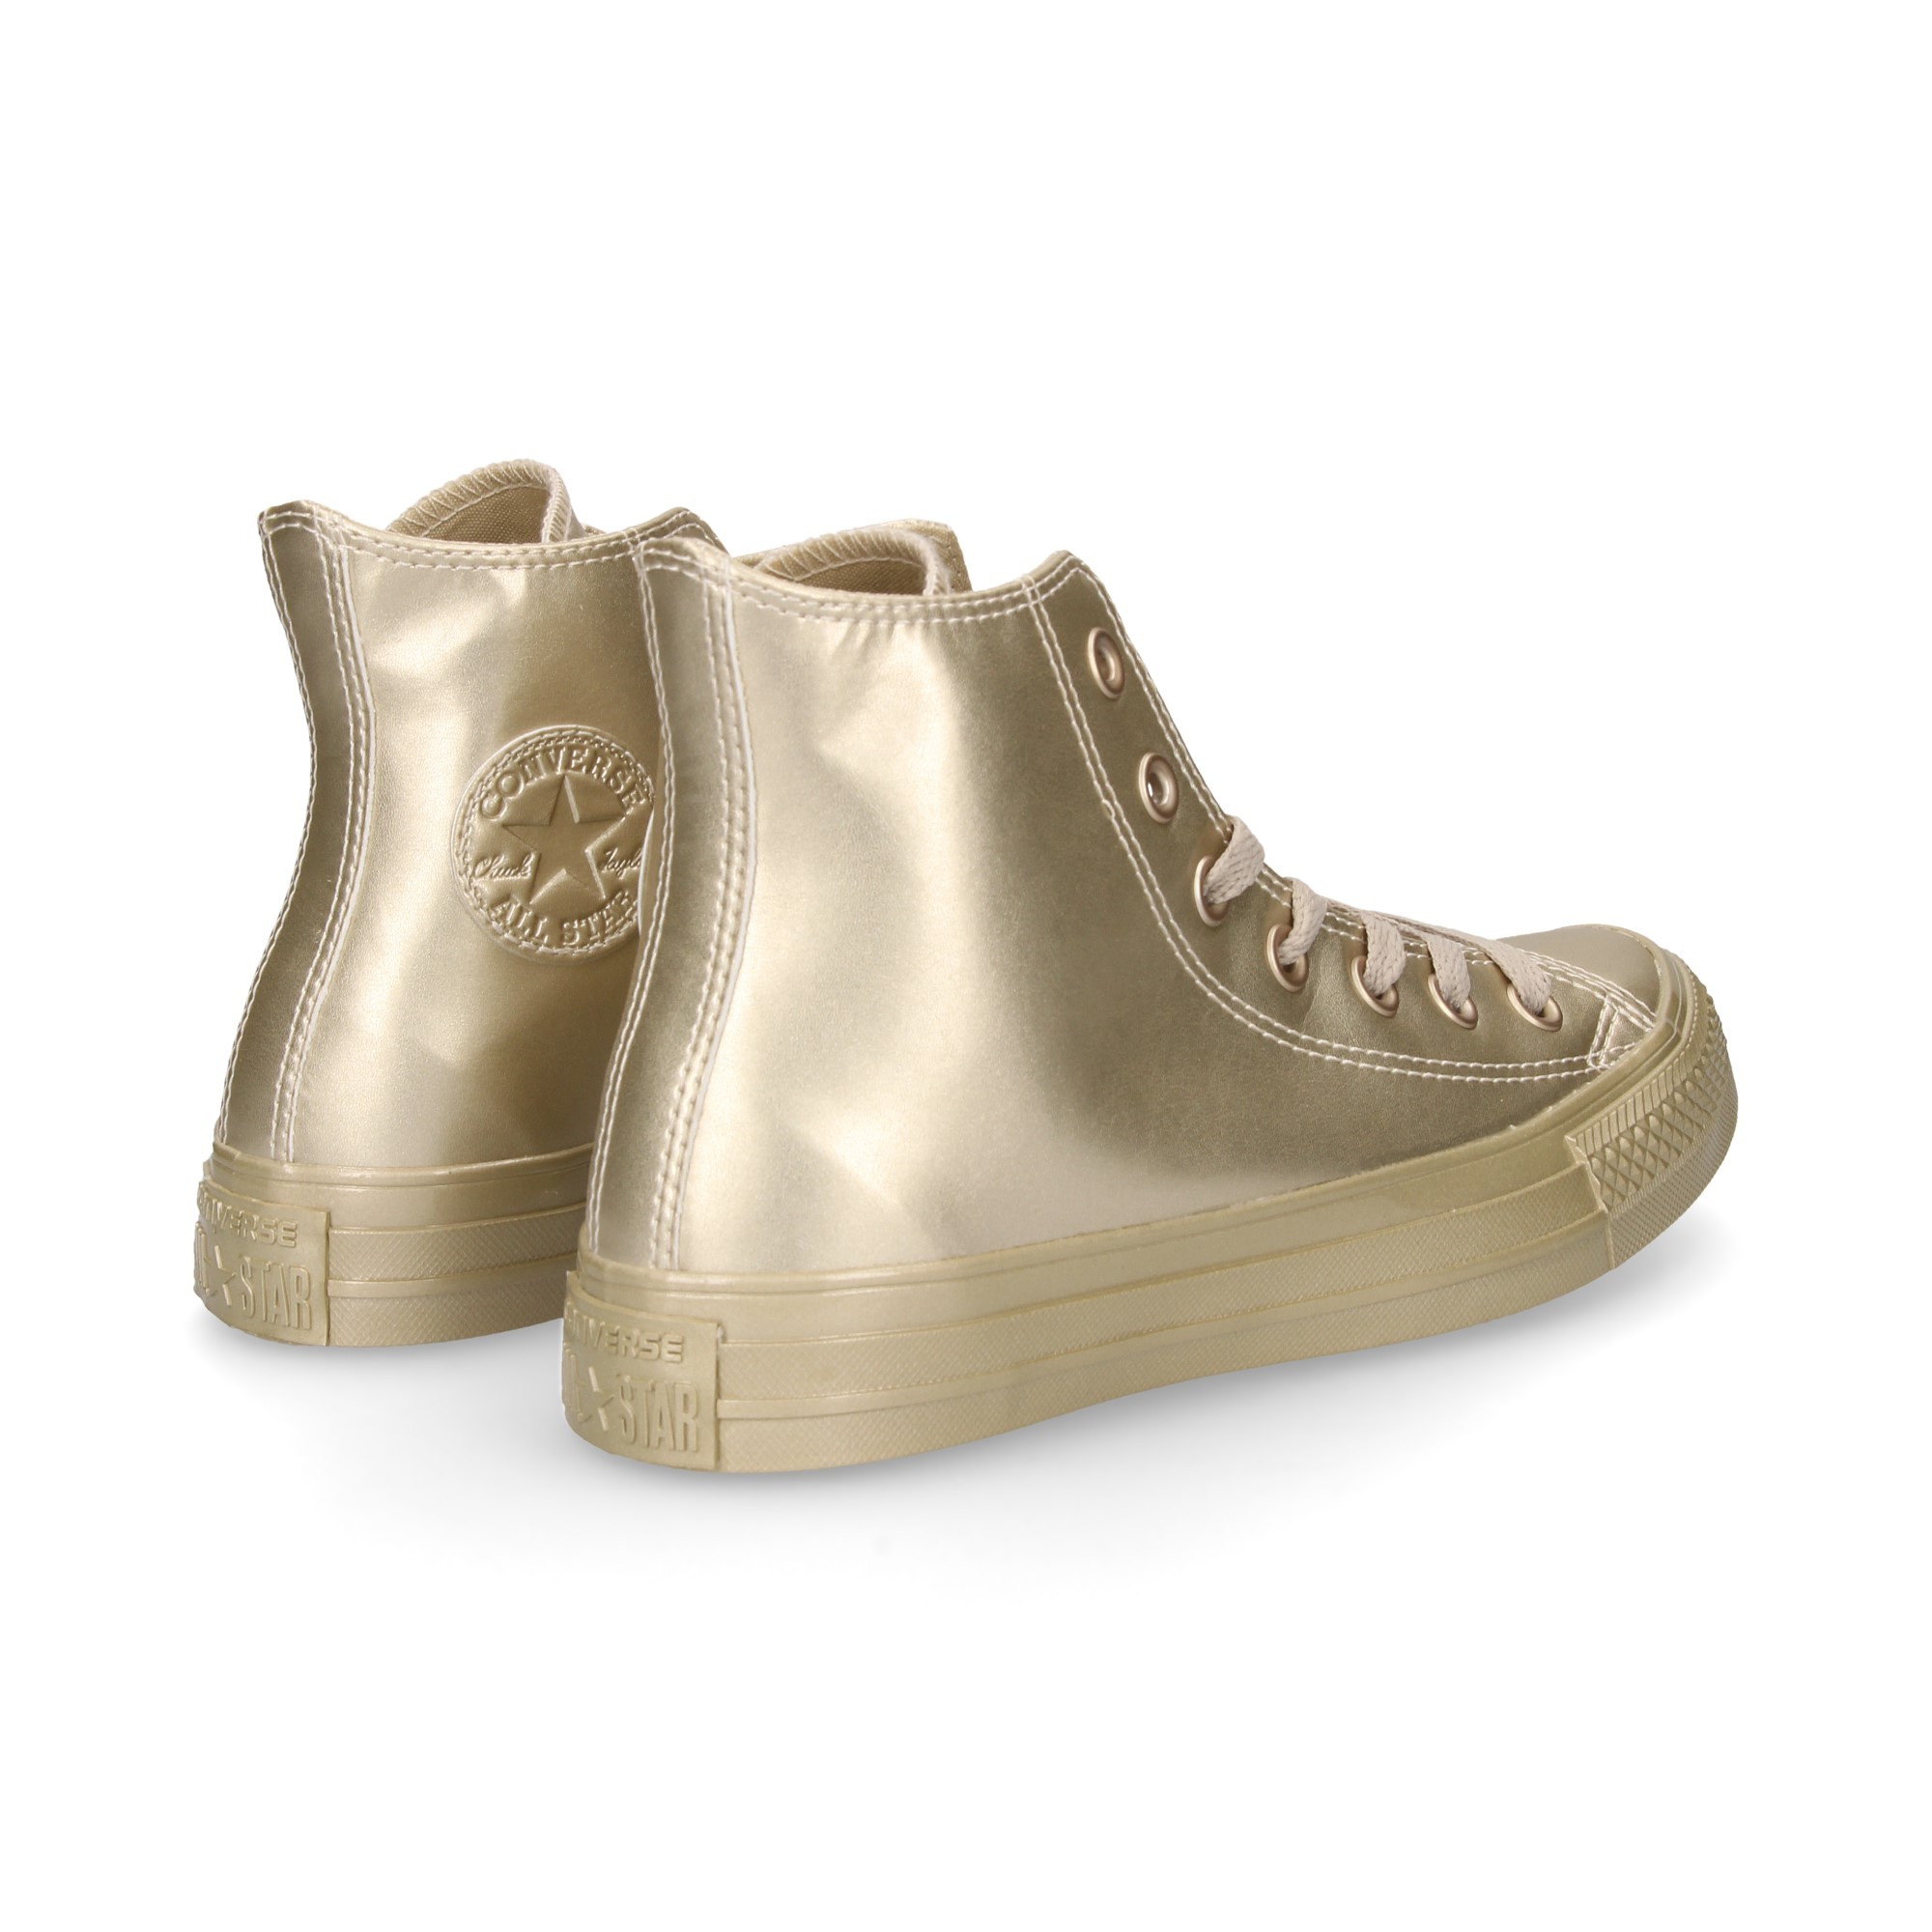 BOOTIN ALL STAR LEATHER GOLD GOLD